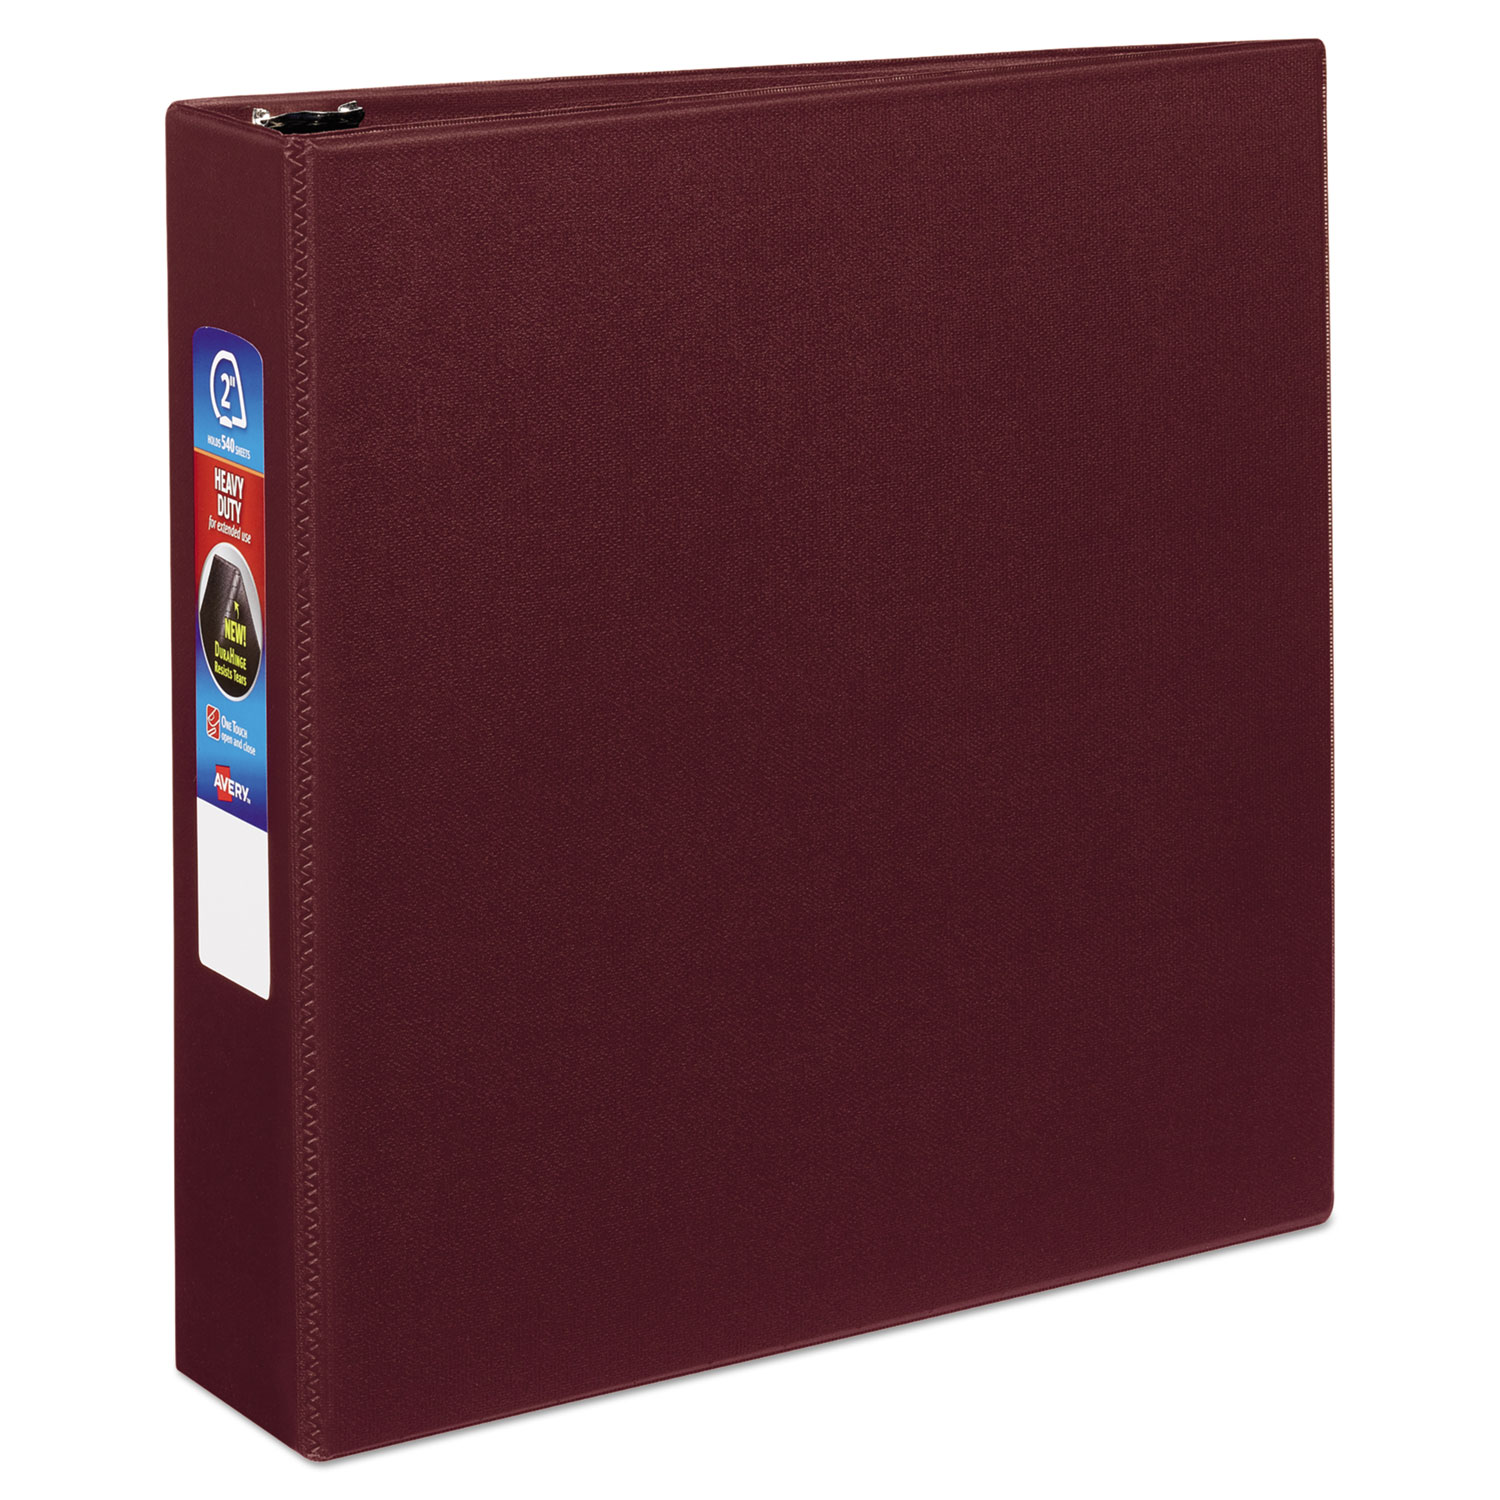  Avery 79362 Heavy-Duty Non-View Binder with DuraHinge and Locking One Touch EZD Rings, 3 Rings, 2 Capacity, 11 x 8.5, Maroon (AVE79362) 